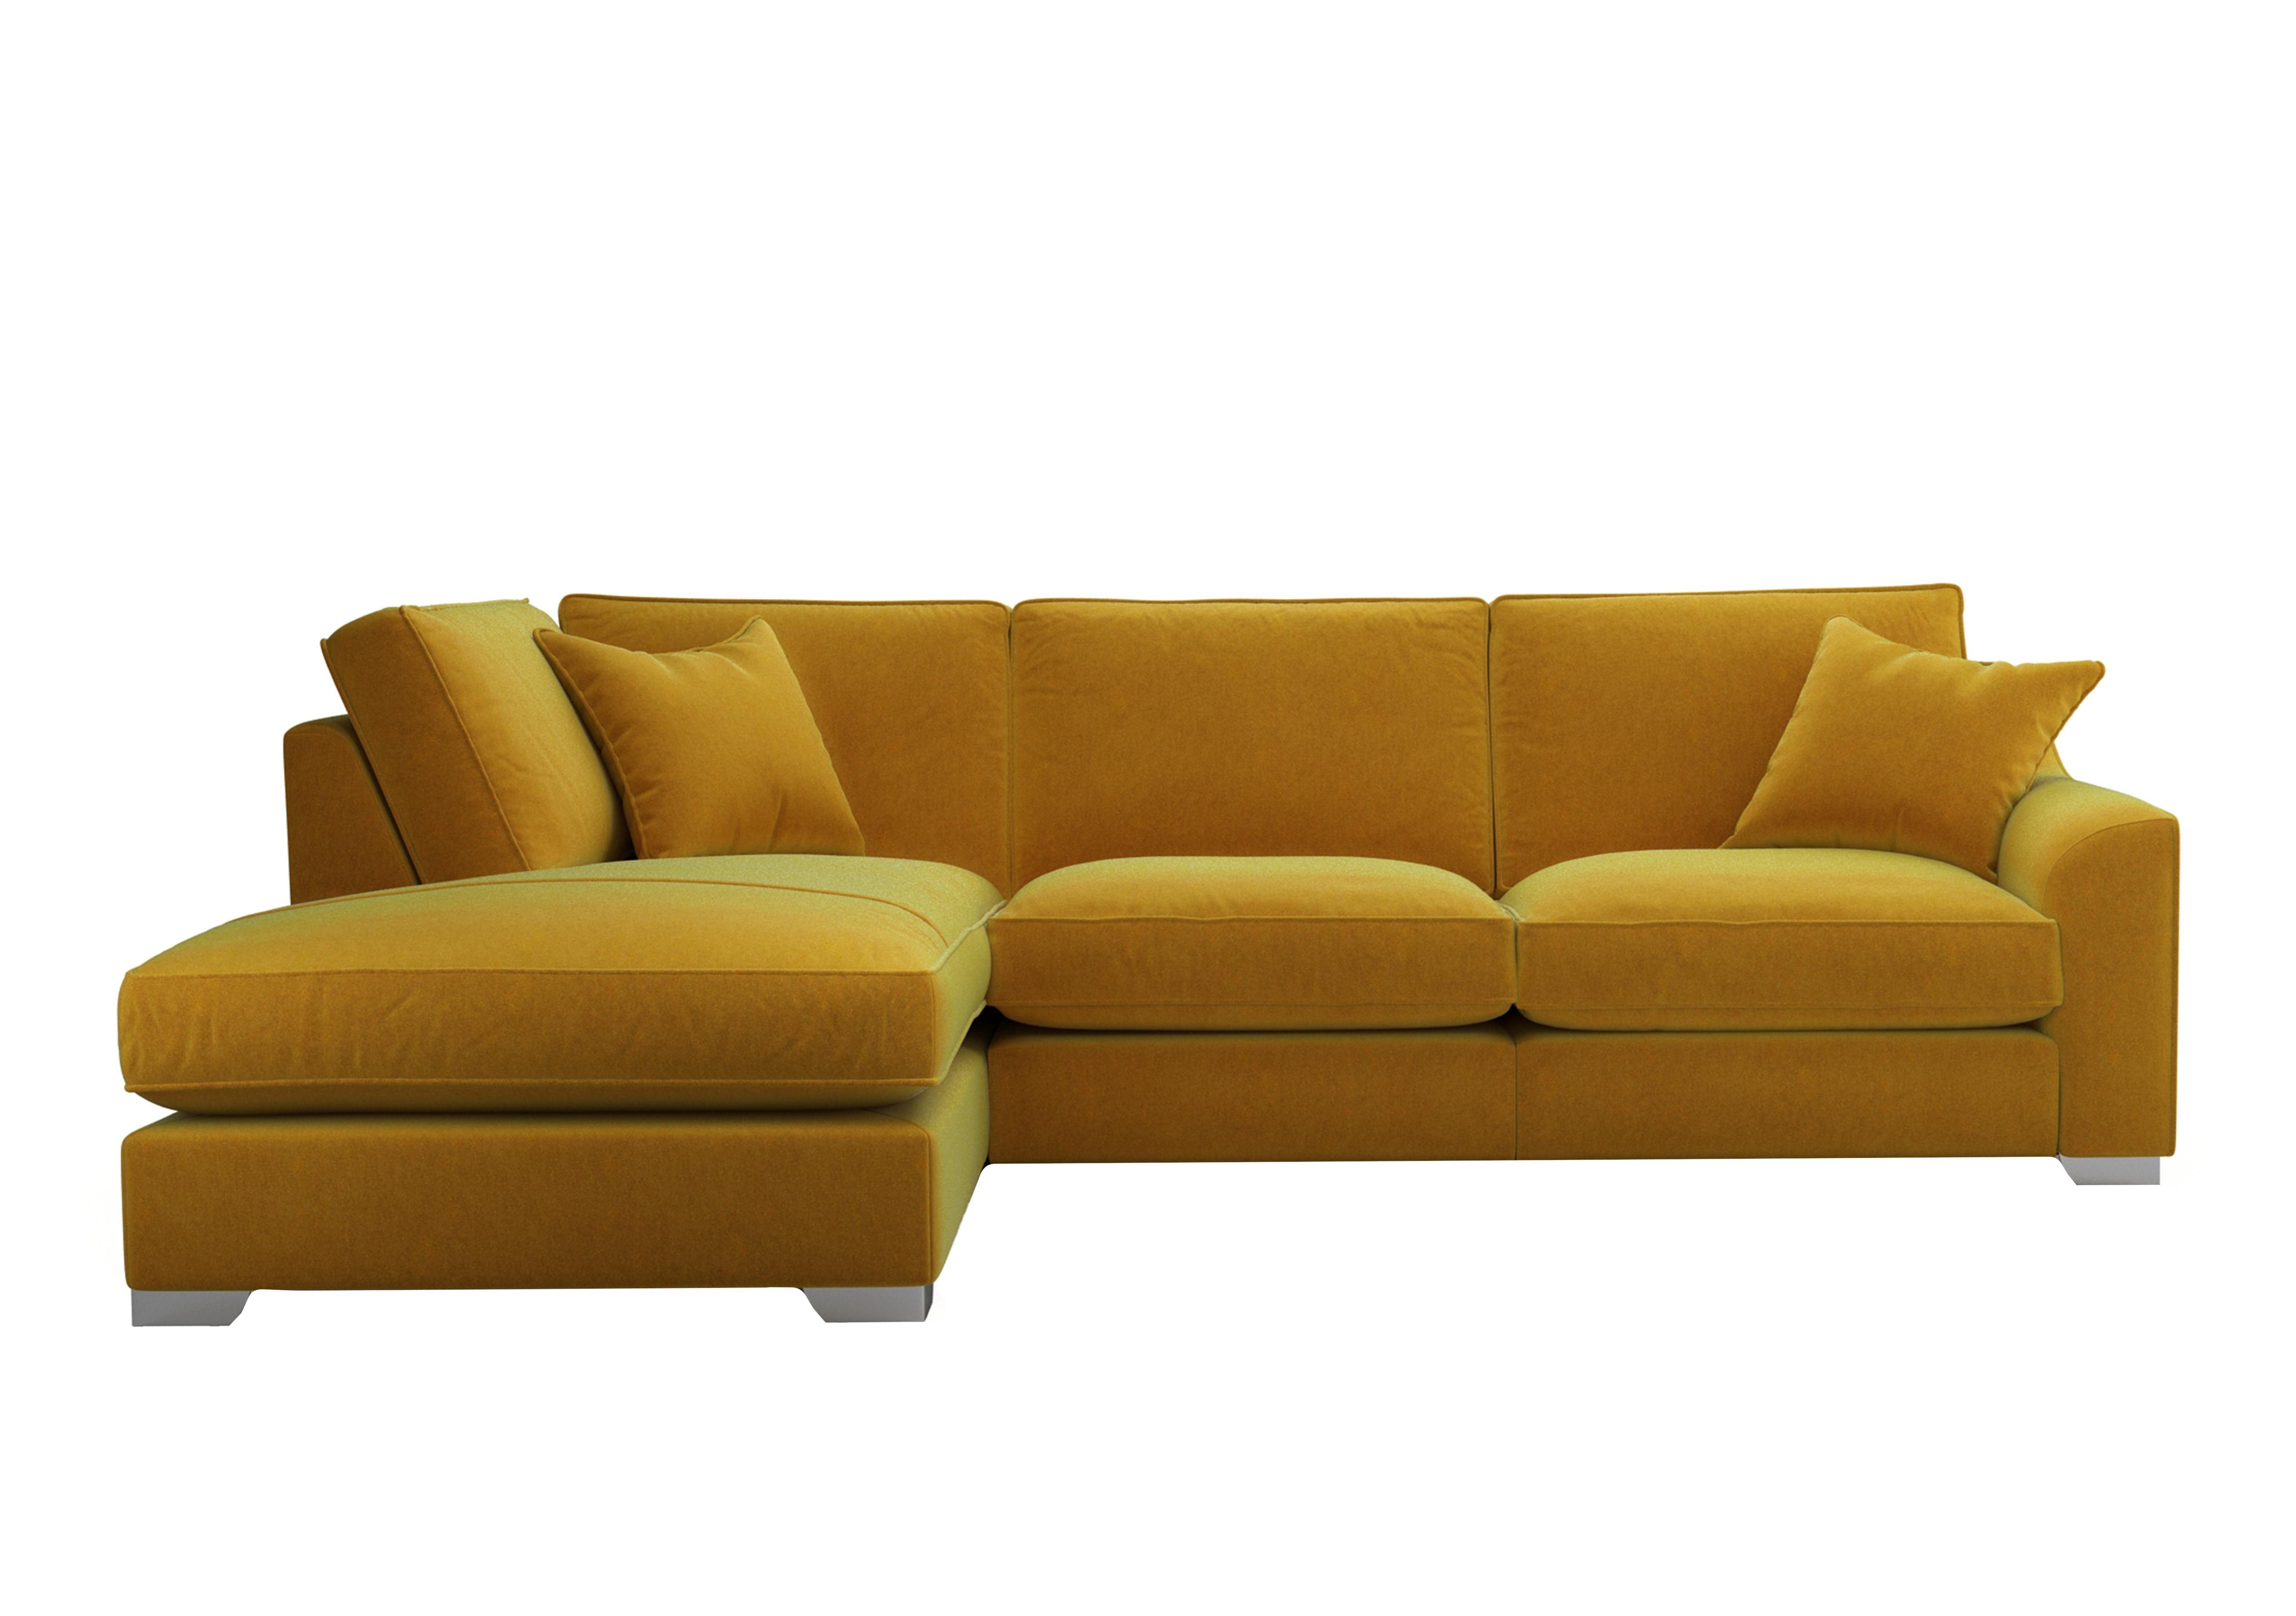 Isobel Fabric Corner Sofa with Chaise End in Gol204 Golden Spice Ch Ft on Furniture Village